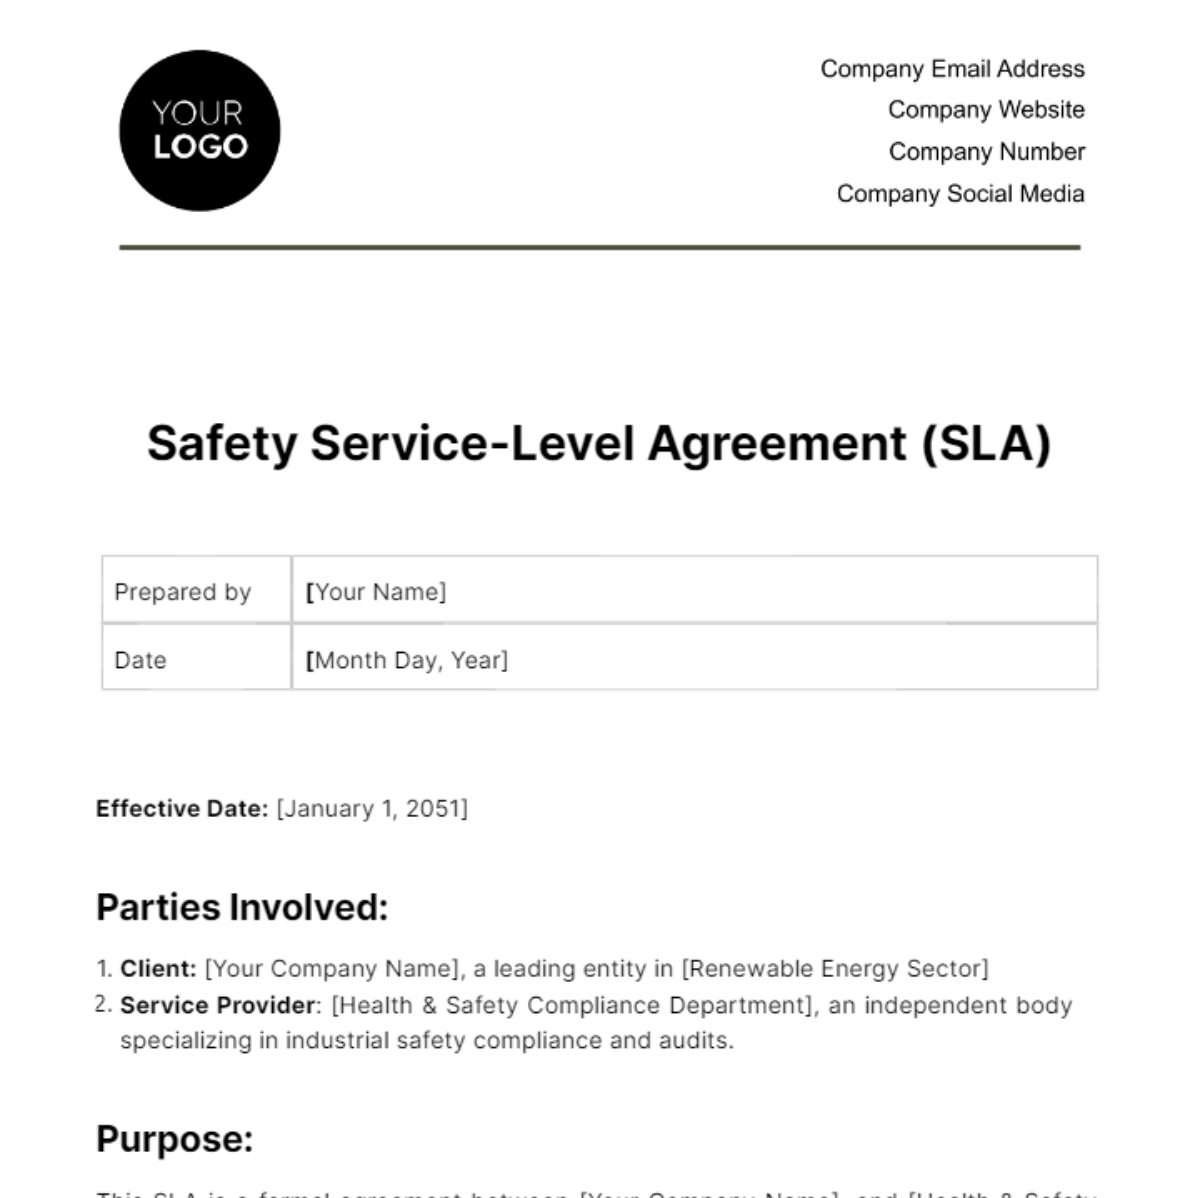 Free Safety Service-Level Agreement (SLA) Template